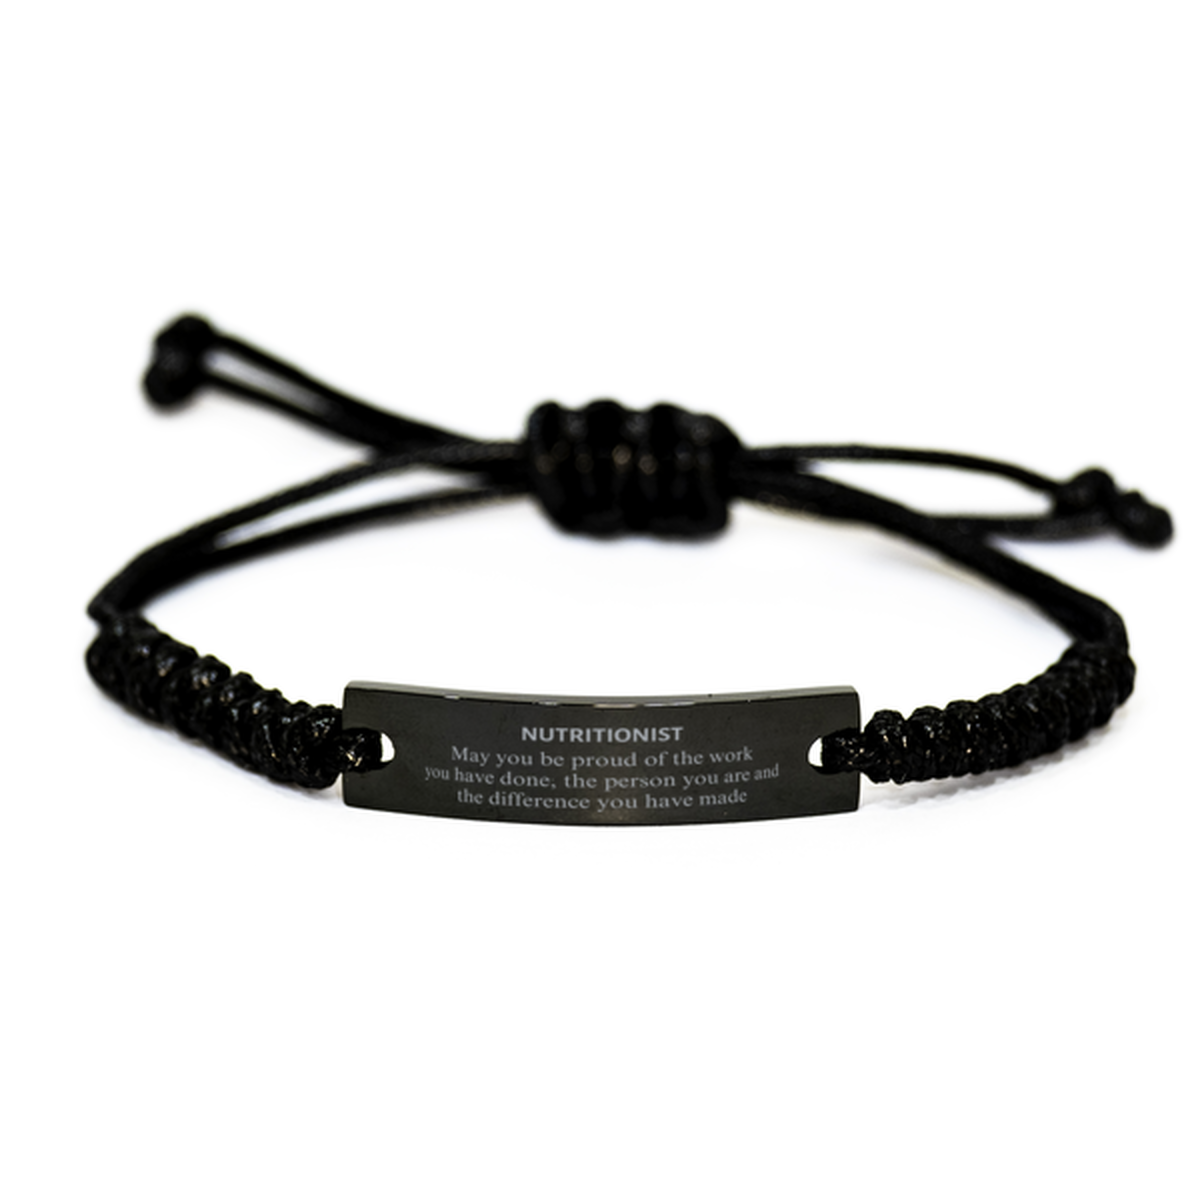 Nutritionist May you be proud of the work you have done, Retirement Nutritionist Black Rope Bracelet for Colleague Appreciation Gifts Amazing for Nutritionist